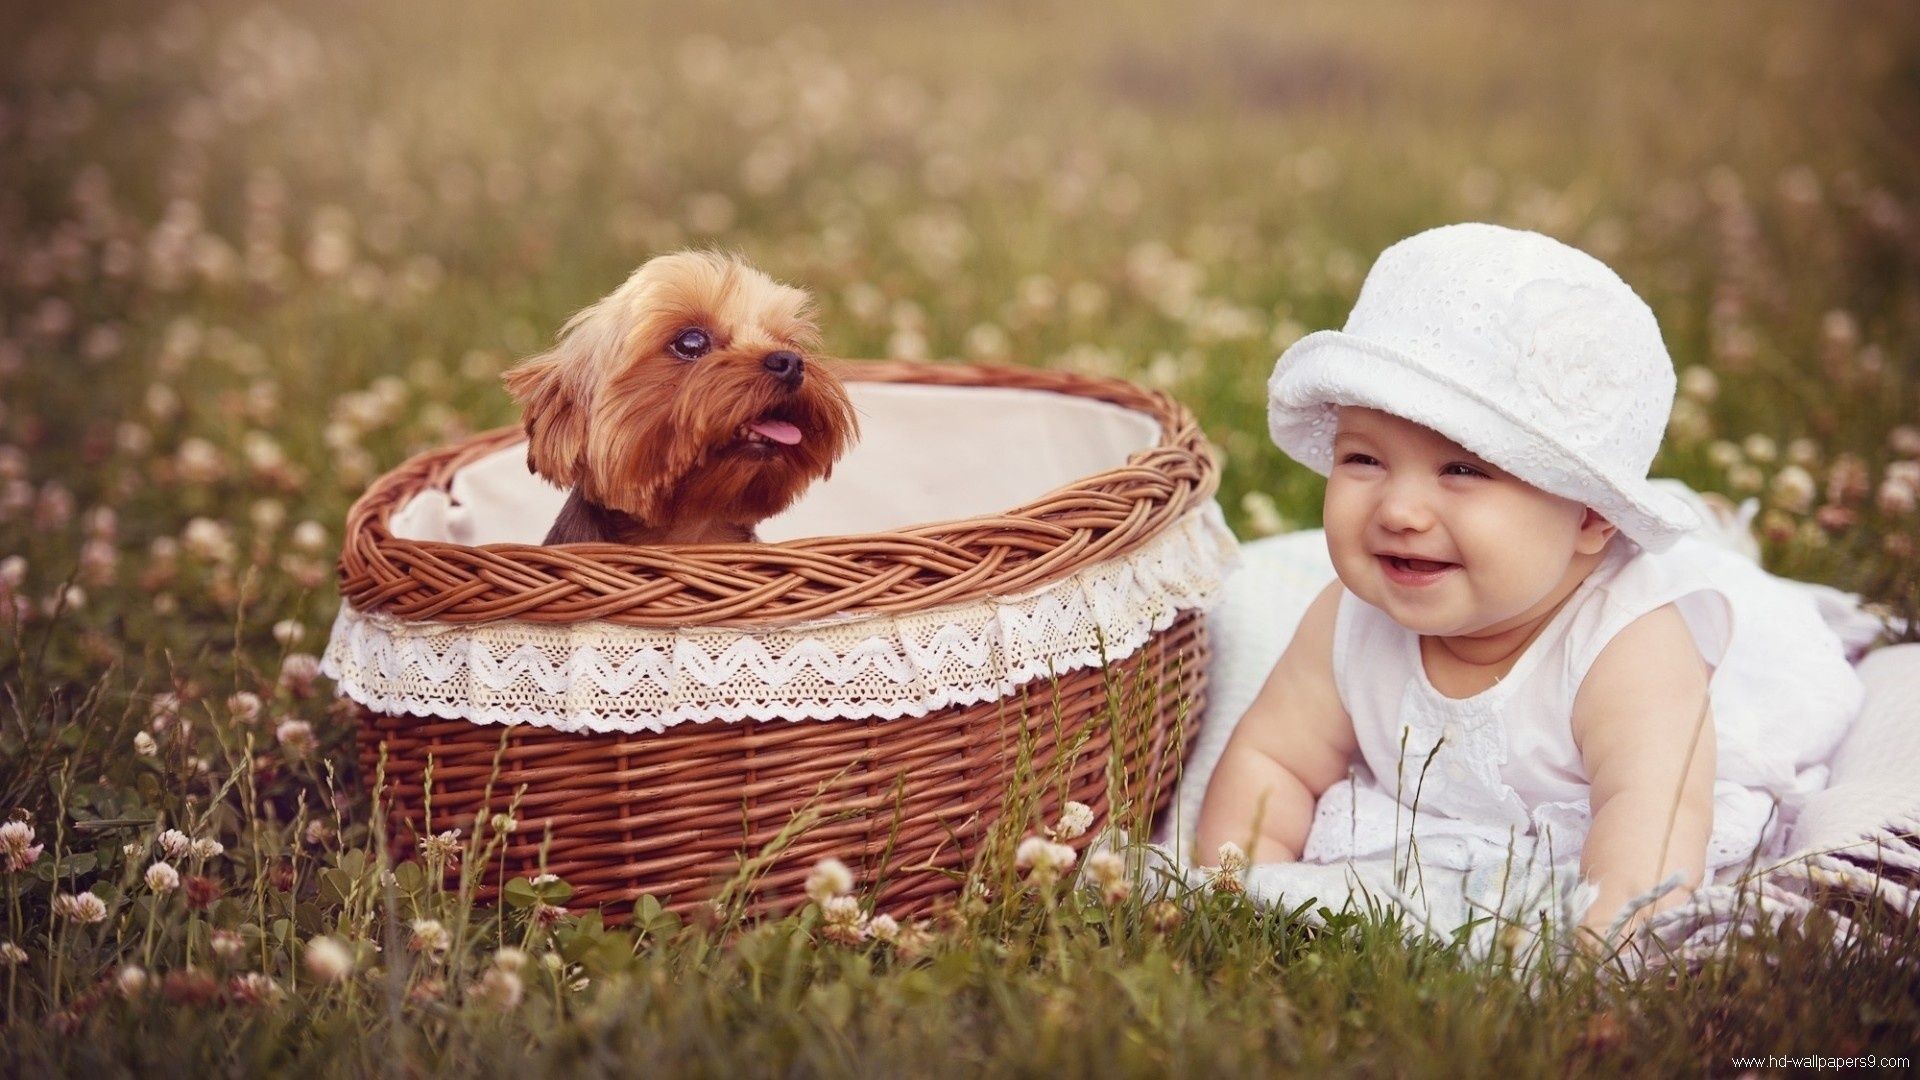 1920x1080 ... 45 small and cute baby wallpaper download for free ...